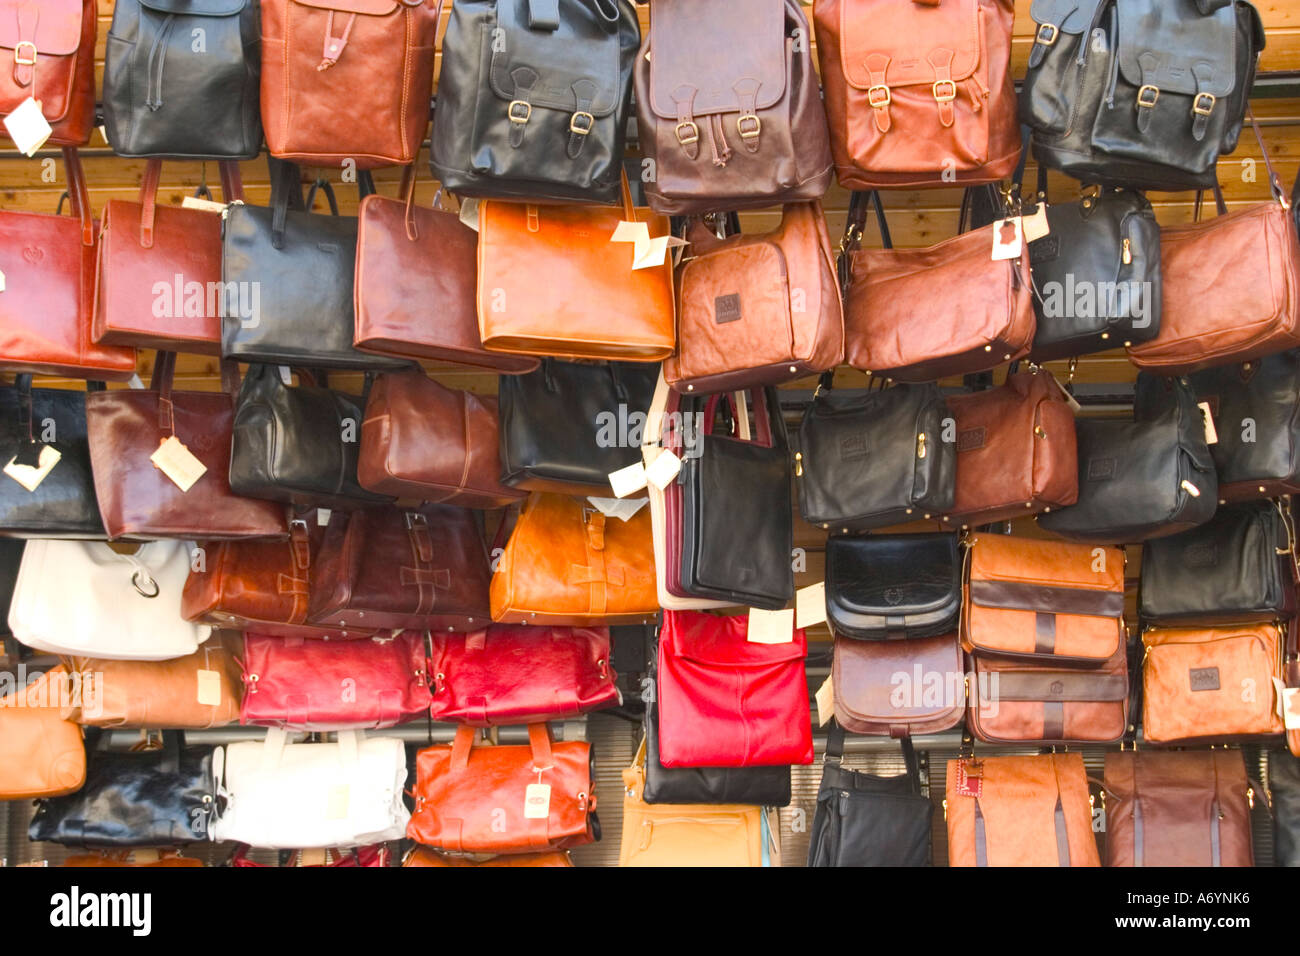 Traditional handbags on sale at a souvenir store in Turkey Stock Photo -  Alamy